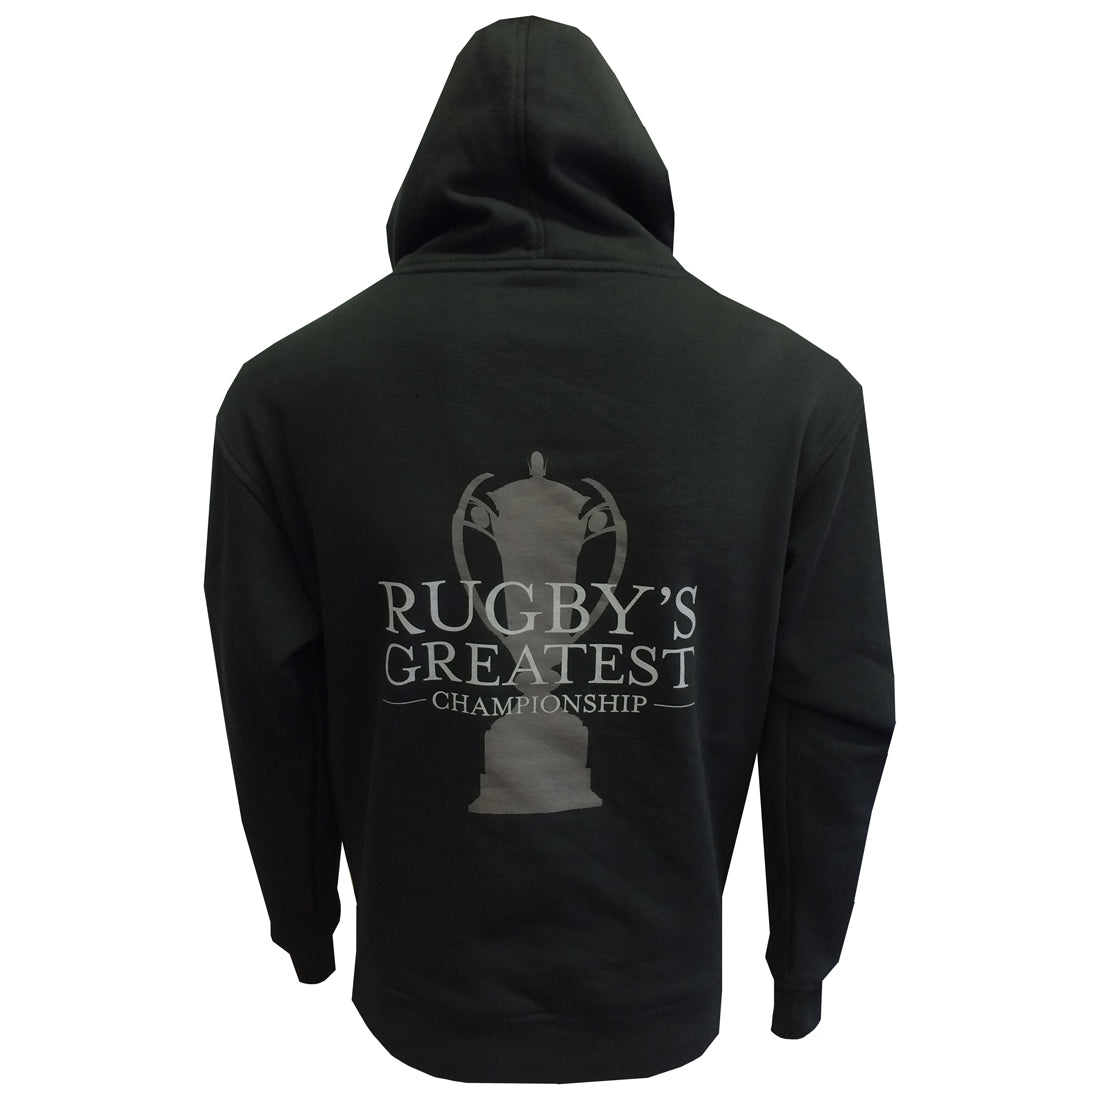 Black hoodie with the text "Guinness Six Nations Rugby Hoodie" and an outline of a trophy on the back by Guinness.